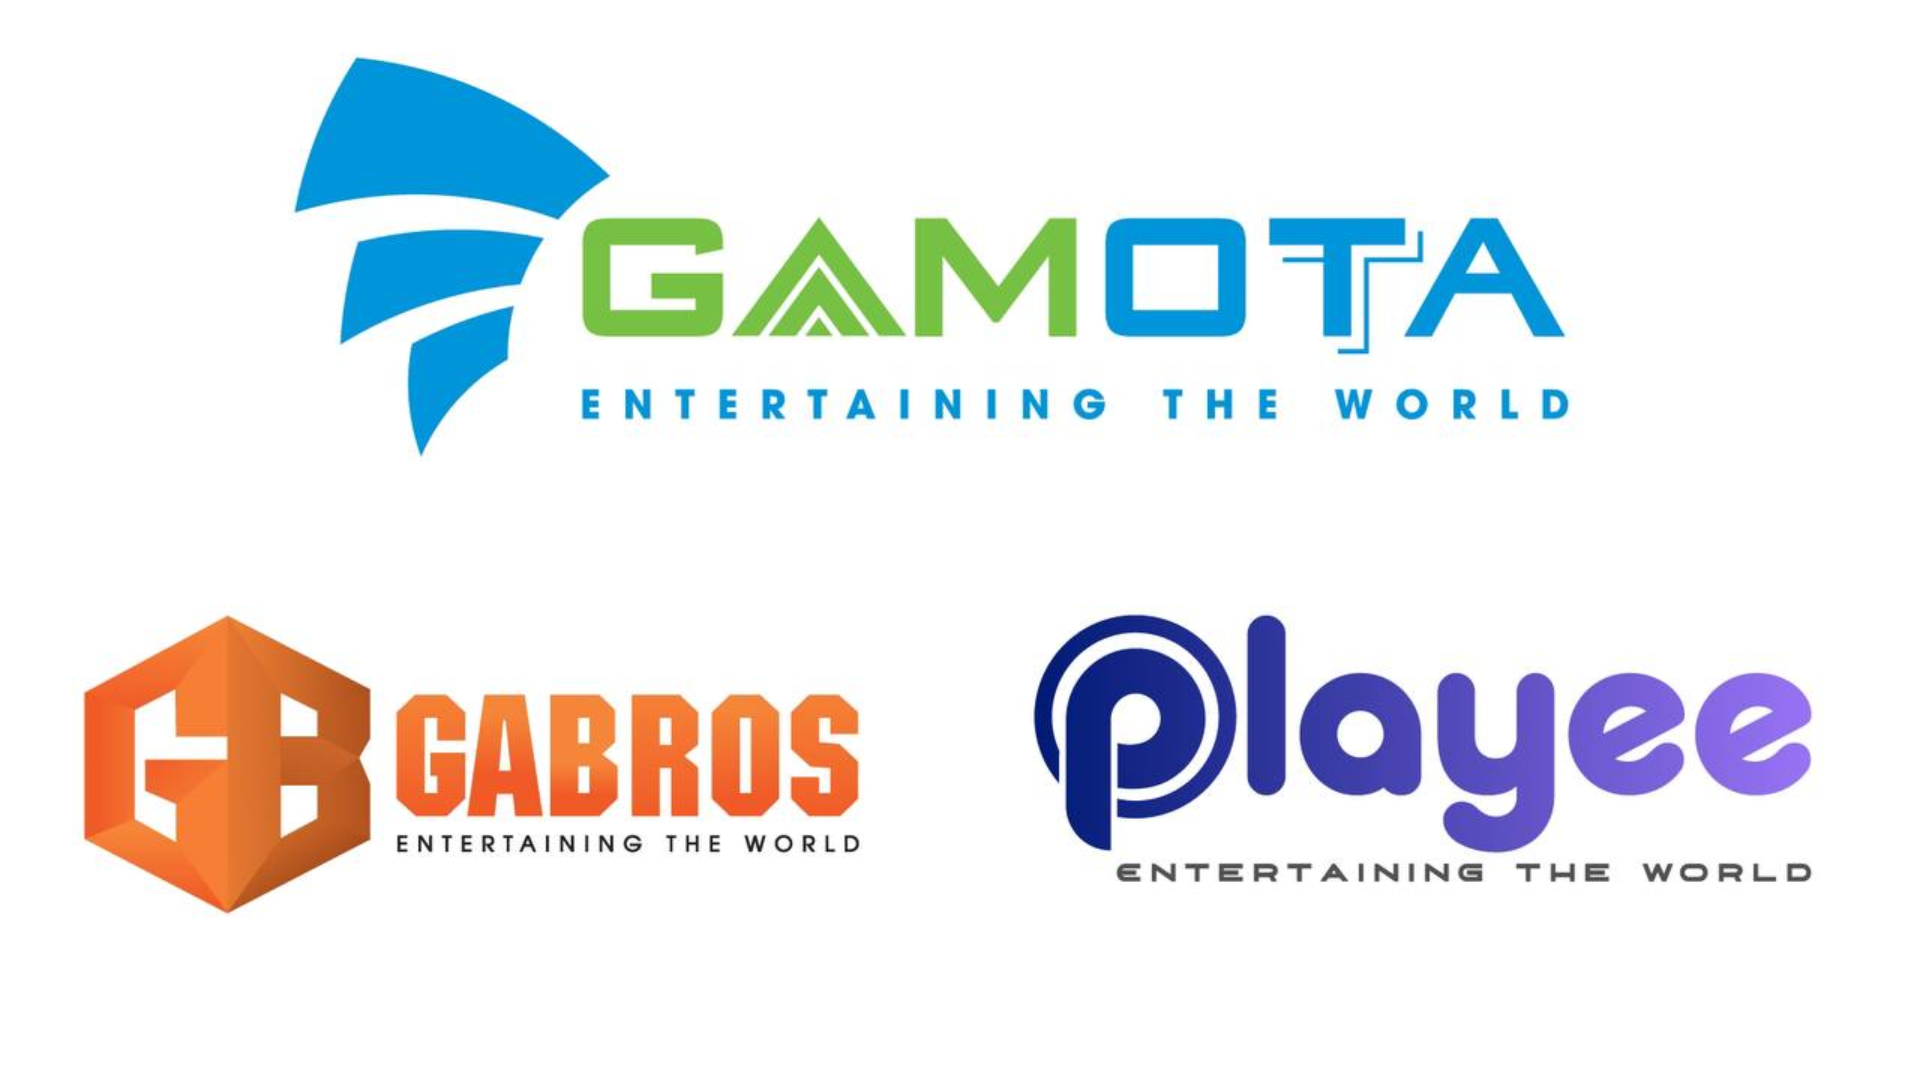 Playee & Gabros - The Ultimate Gaming Ecosystem